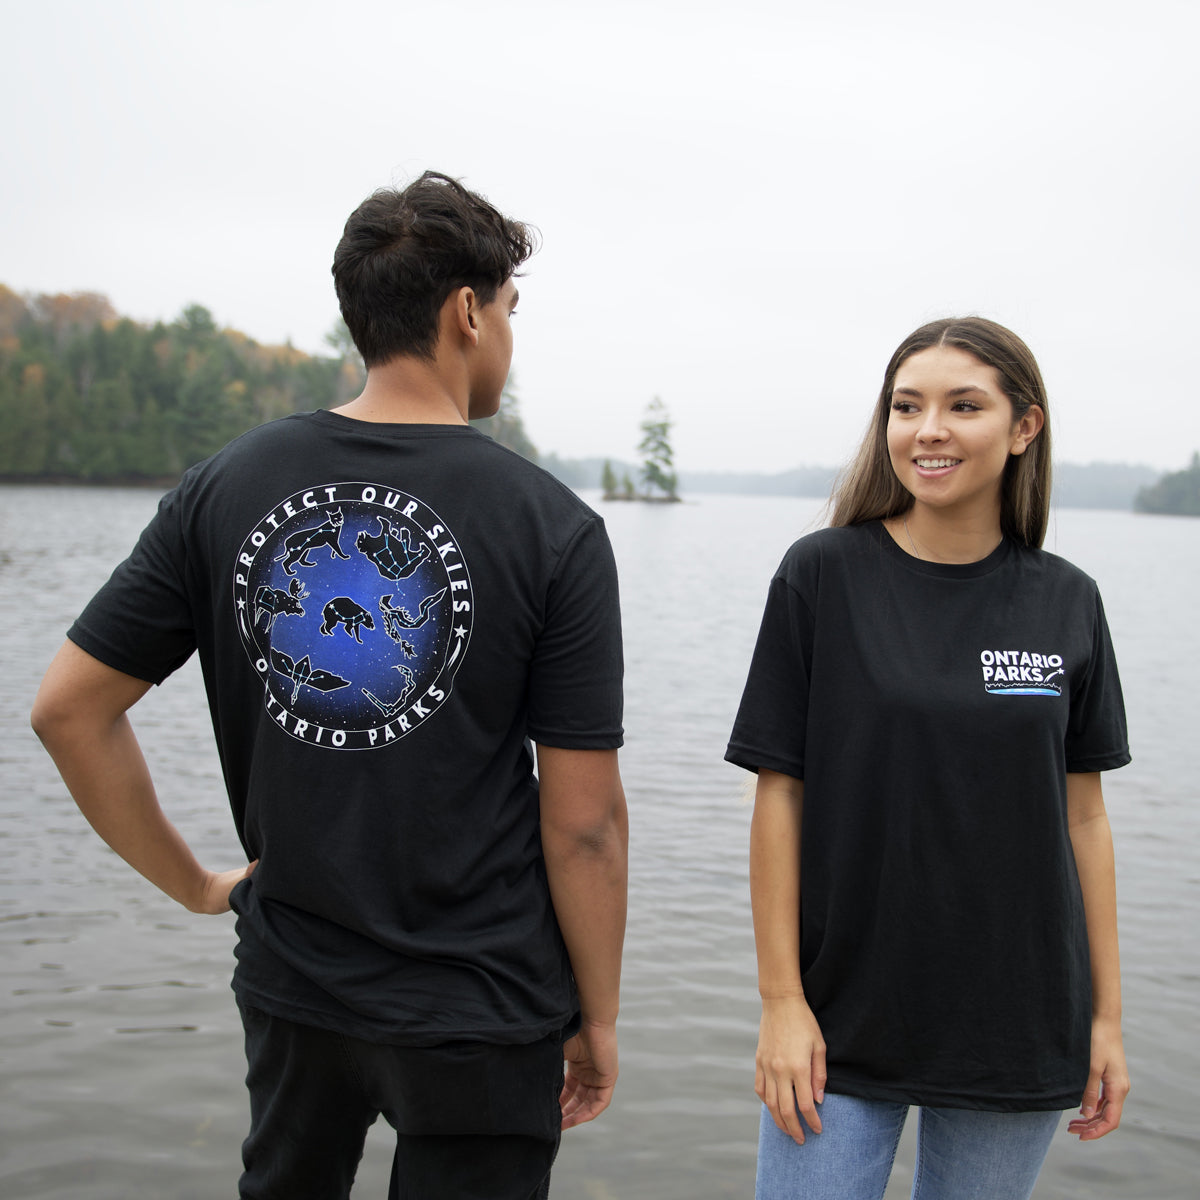 Man standing in front of body of water looking over right shoulder. Wearing Ontario Parks Protect our skies T-Shirt with back to screen showing back of t shirt. Ontario Parks Protect Our Skies text is white and circles around star and animals constellations. Woman is on right side wearing Ontario Parks Protect Our Skies T-shirt facing front. T shirt has Ontario Parks in white text on upper right side with shooting star and blue underline. 